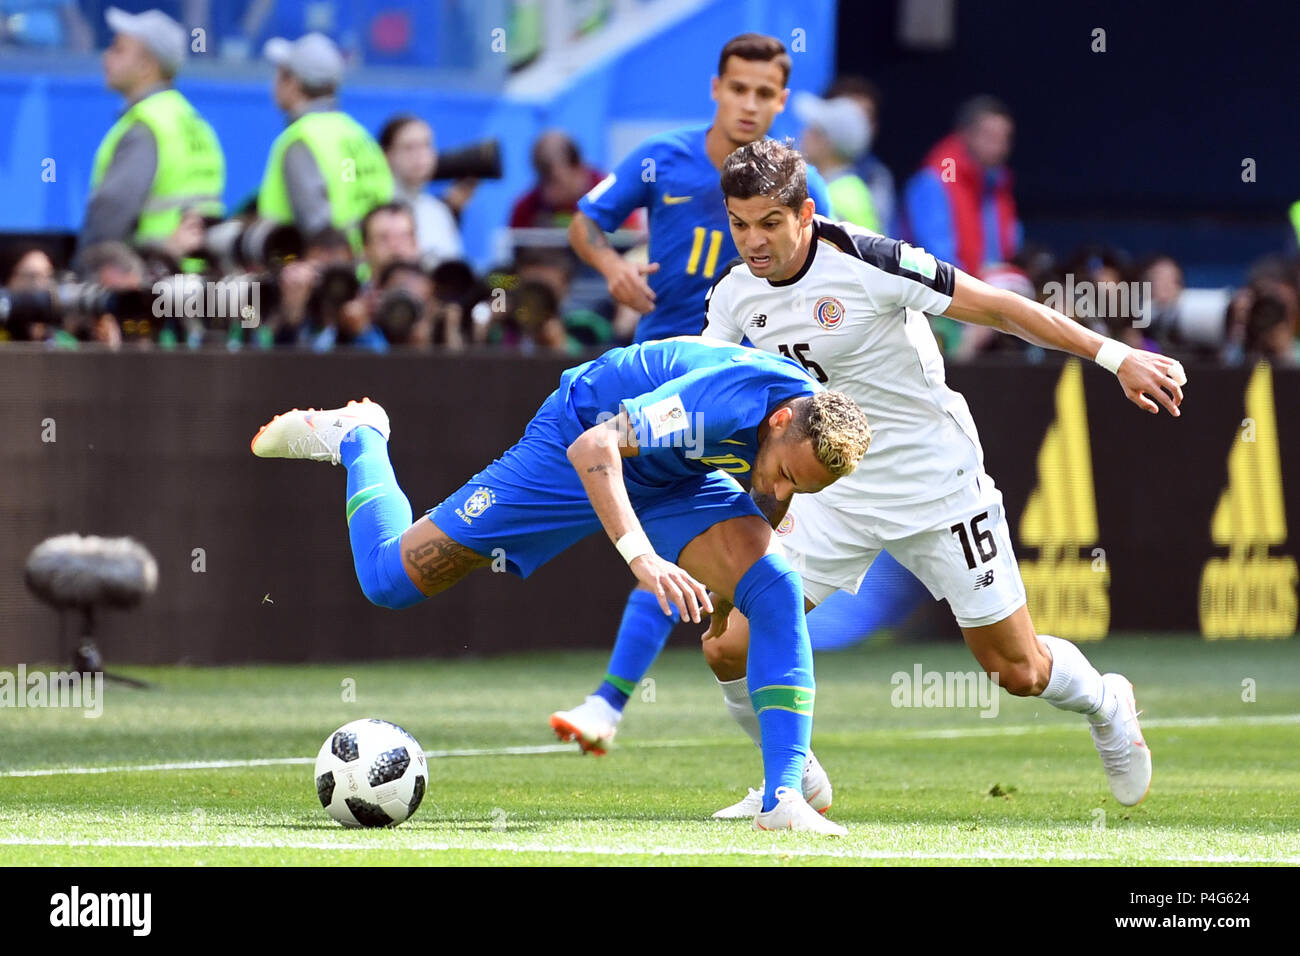 Saint Petersburg, Russia. 22nd June, 2018. Soccer: Preliminary stage, Group E, 2nd matchday: Brazil vs Costa Rica in the St. Petersburg Stadium: Brazil's Neymar (L) and Costa Rica's Cristian Gamboa in action. Credit: Federico Gambarini/dpa/Alamy Live News Stock Photo